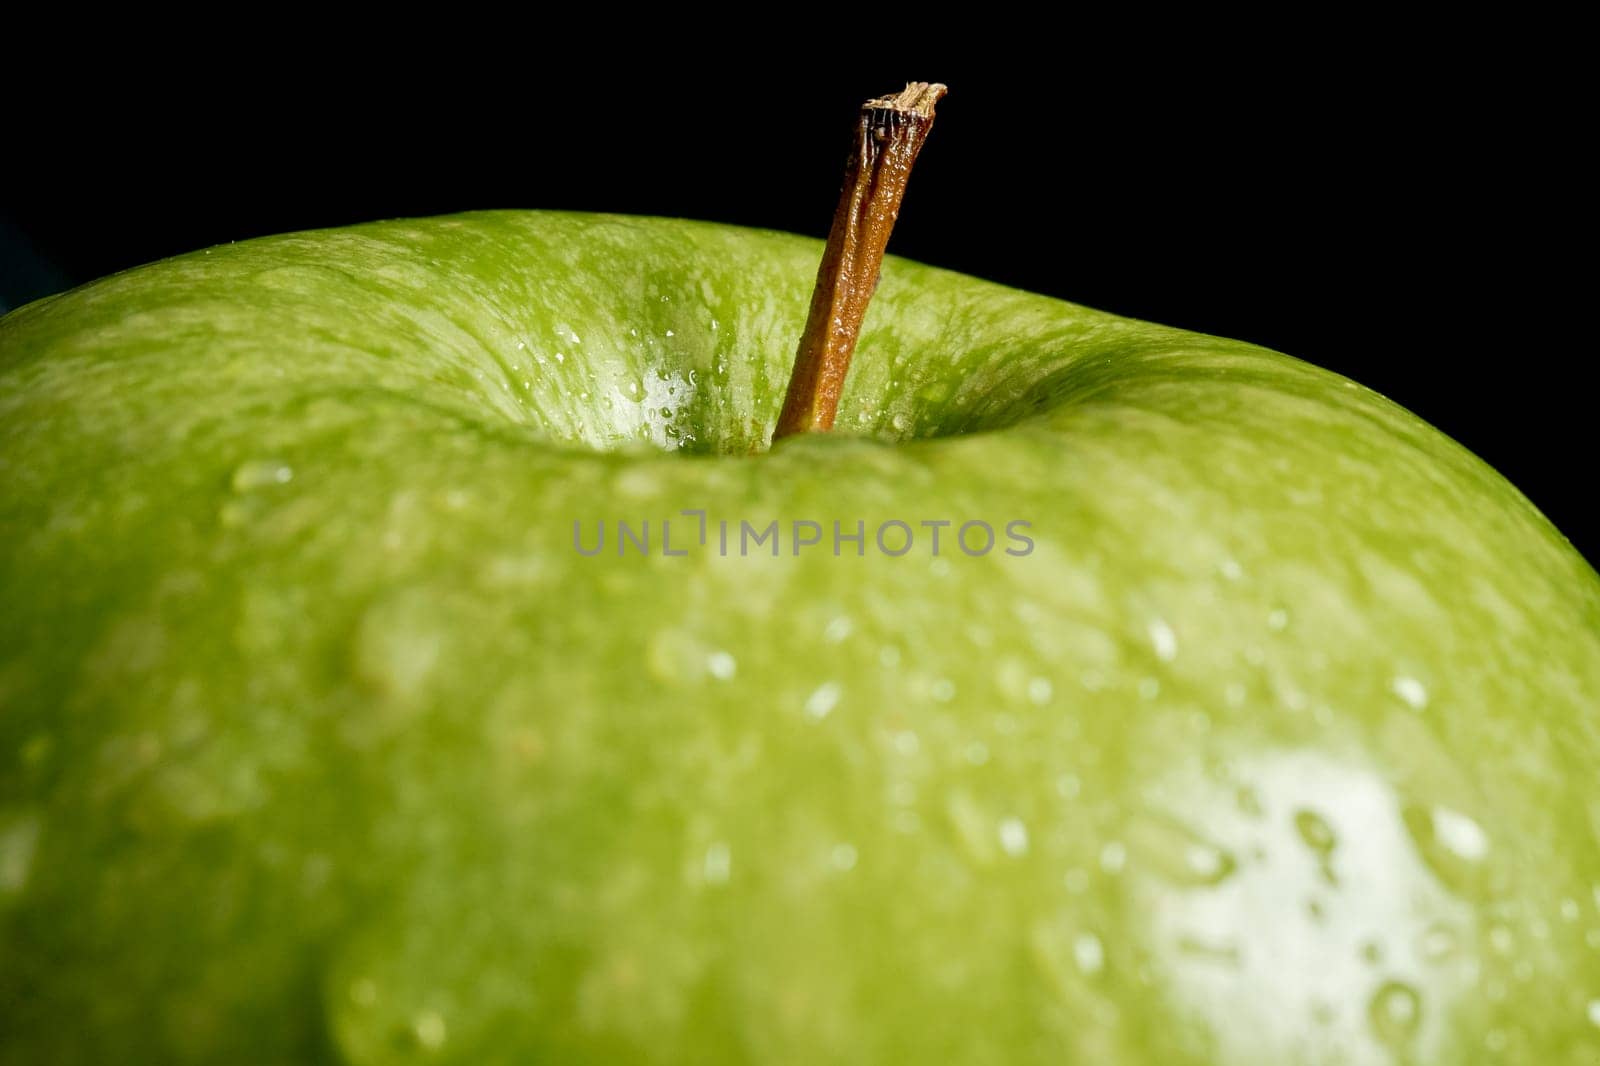 Close up of green organic fresh apple with water drops on black background